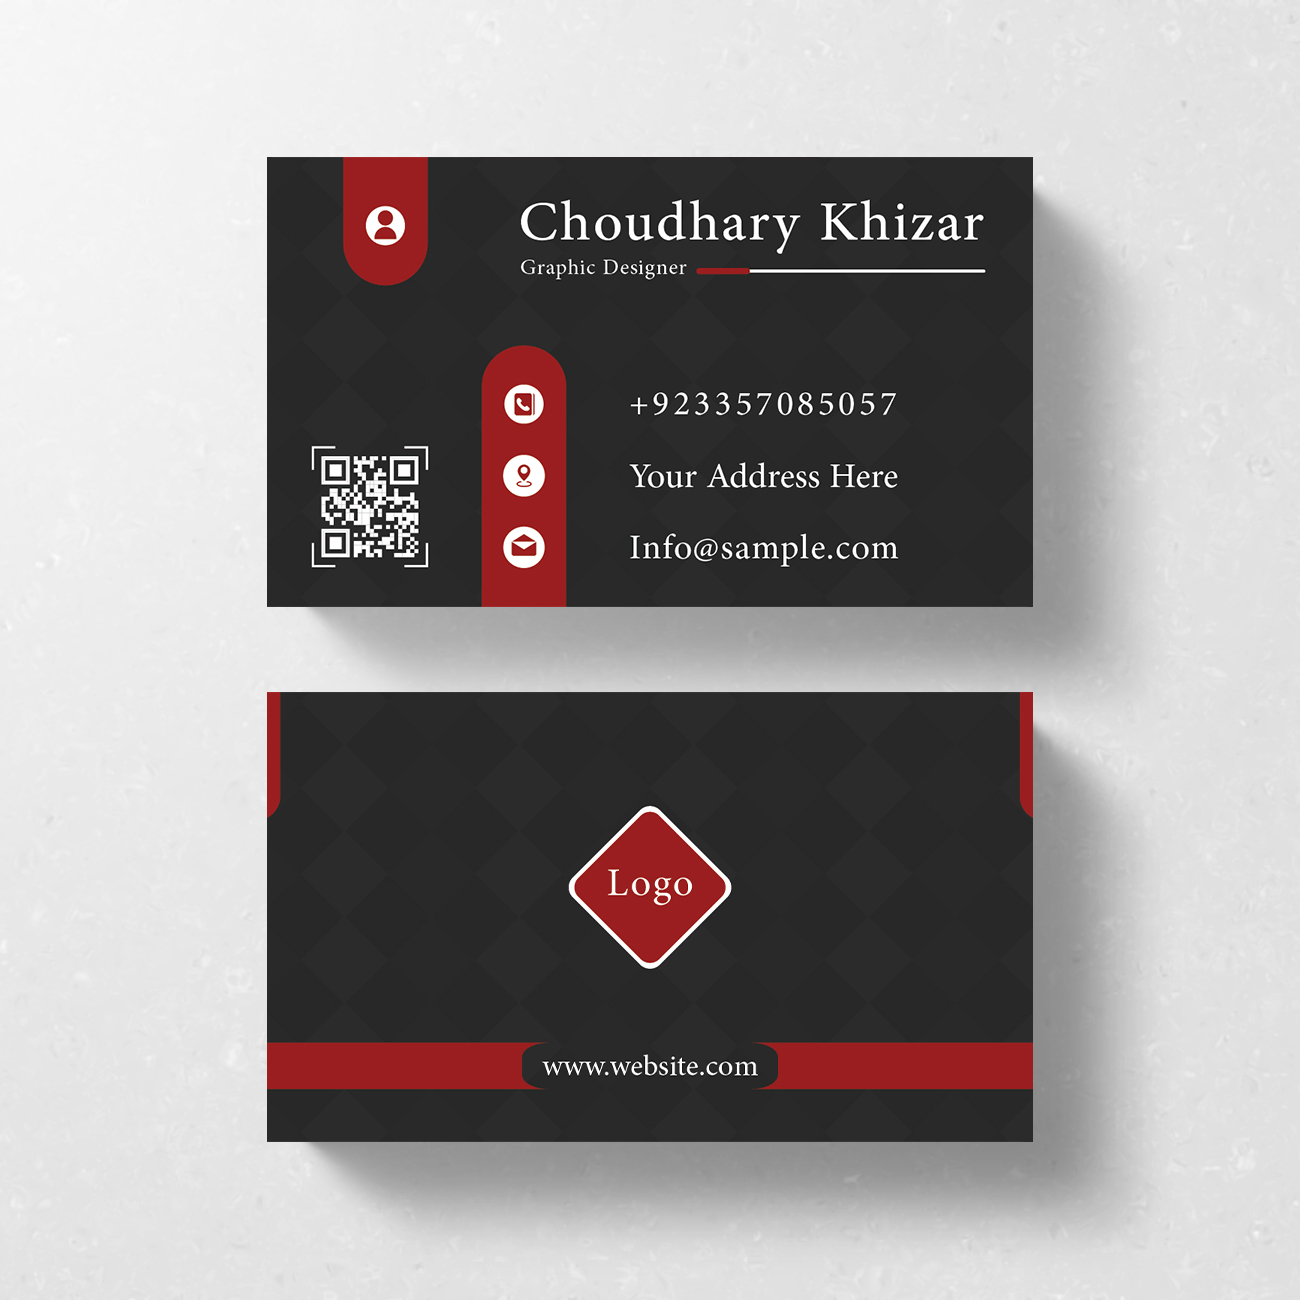 These business cards would be perfect for real estate business ,clothing business & many more.